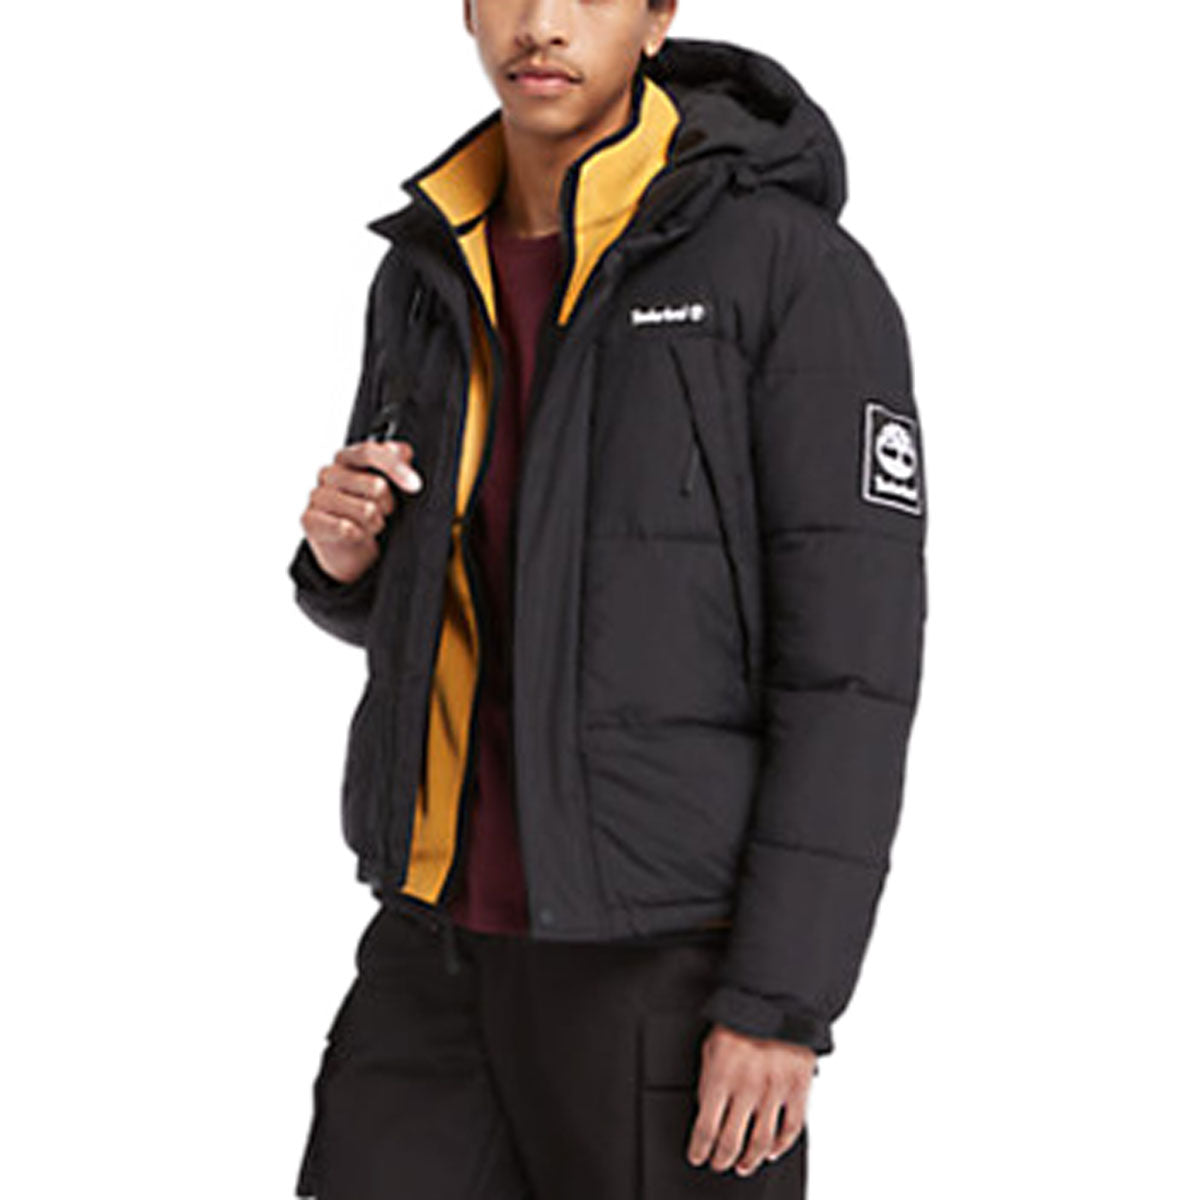 Timberland DWR Outdoor Archive Puffer Jacket - Black image 2